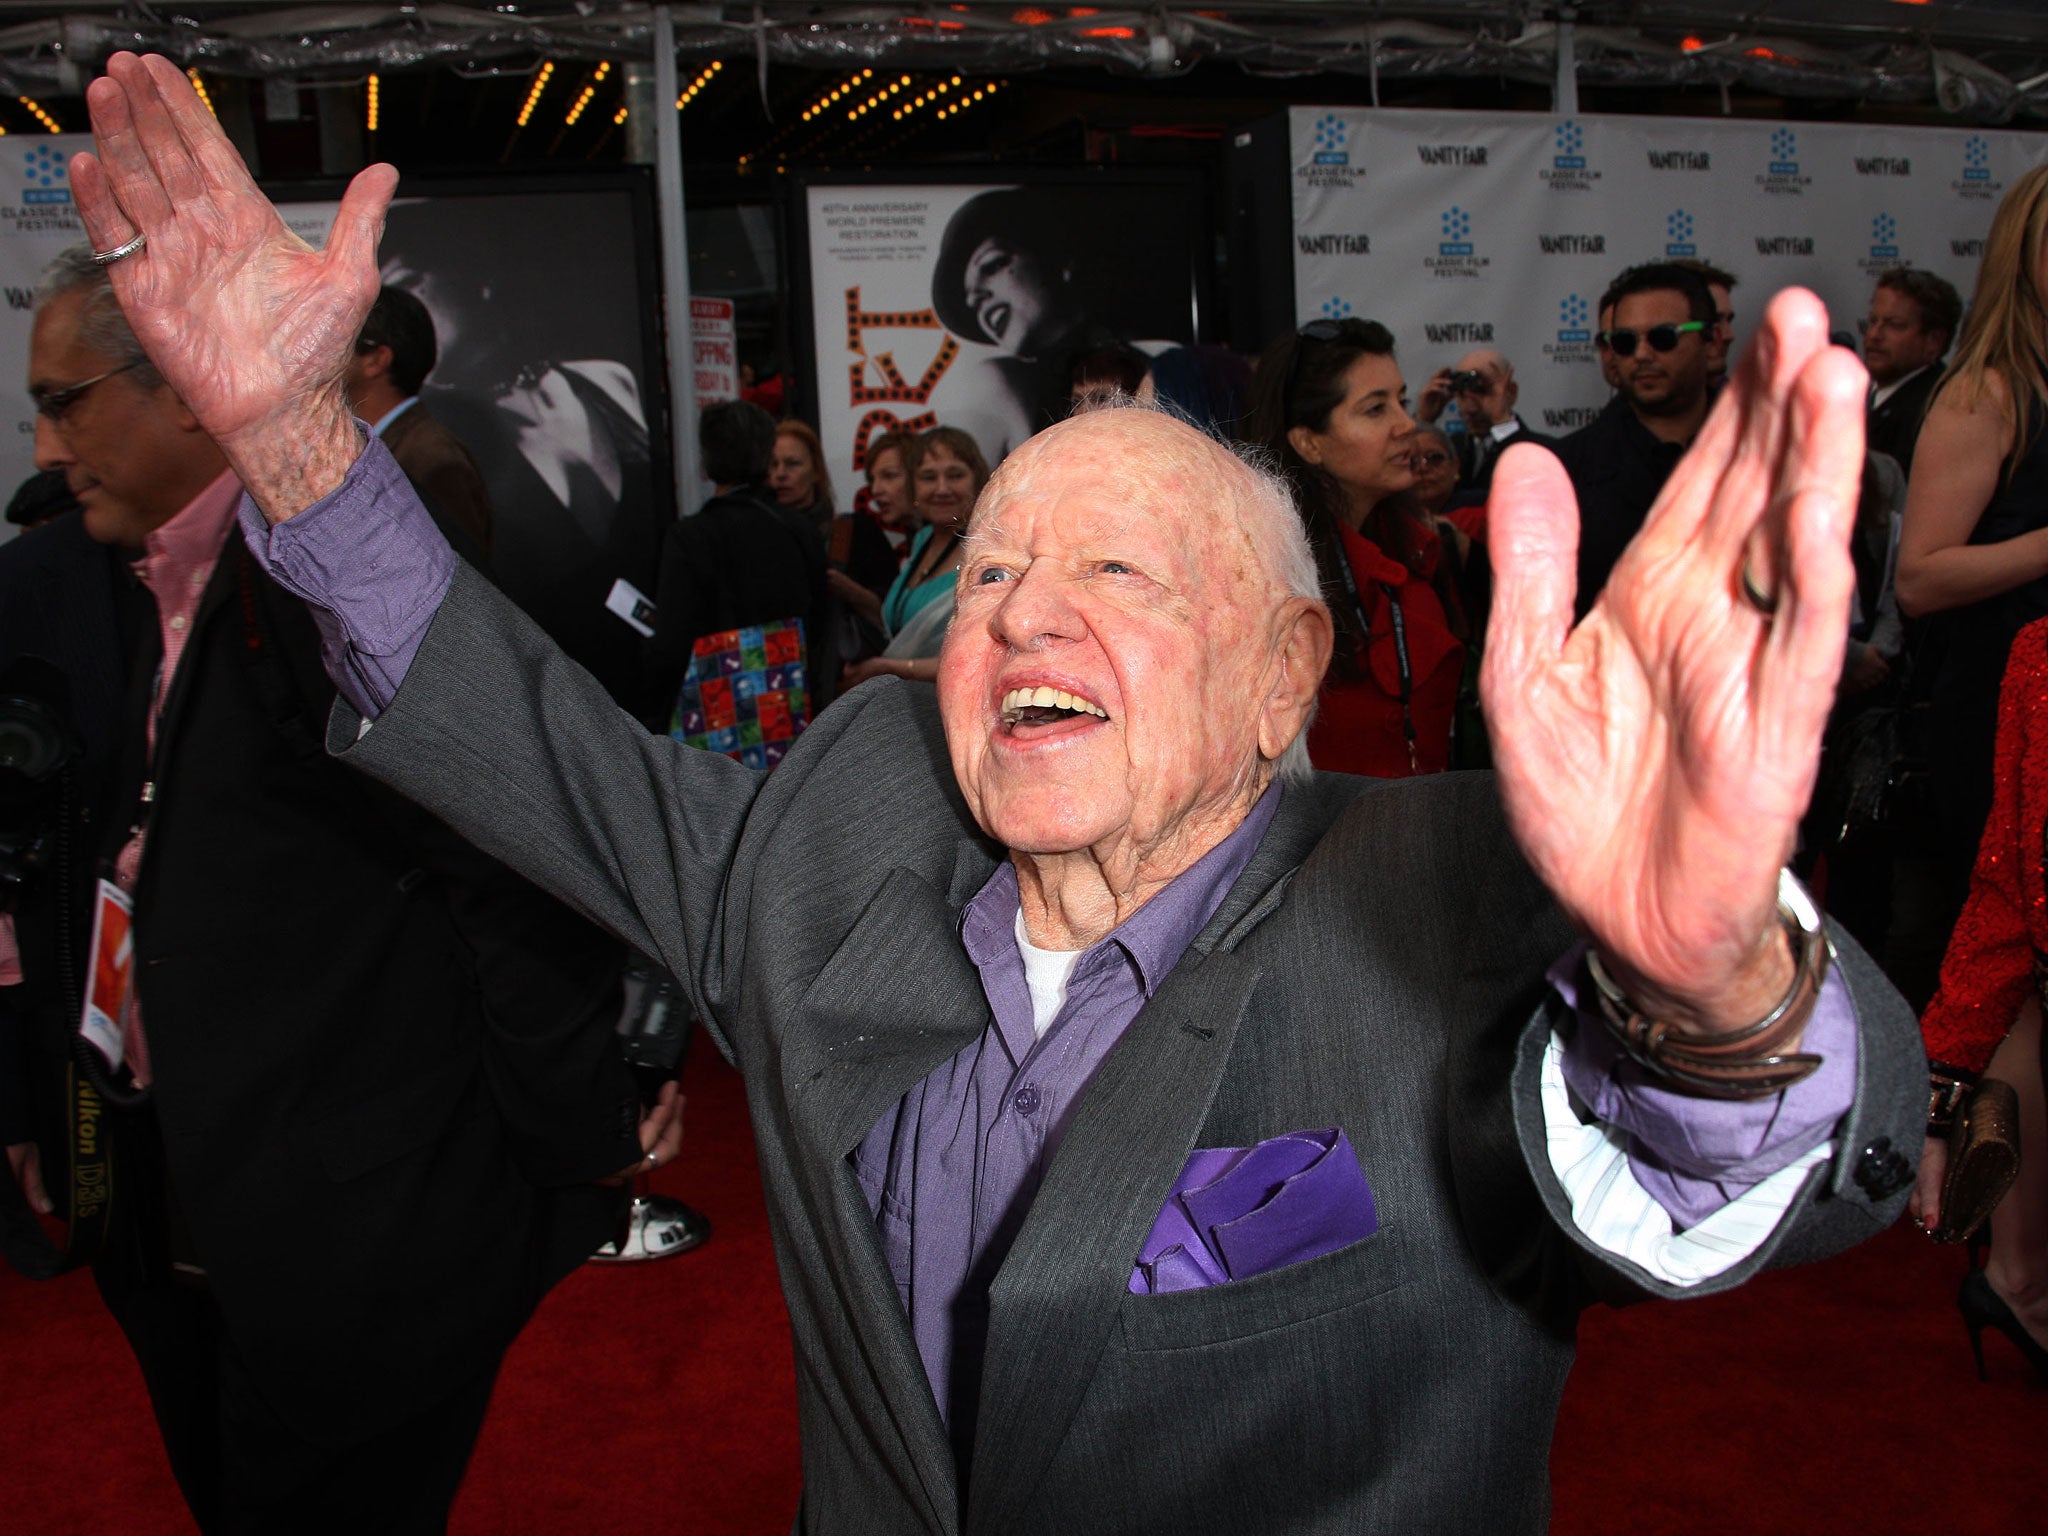 Mickey Rooney, the pint-size, precocious actor and all-around talent whose more than 80-year career spanned silent comedies, Shakespeare, Judy Garland musicals, Andy Hardy stardom, television and the Broadway theater, died Sunday at age 93.